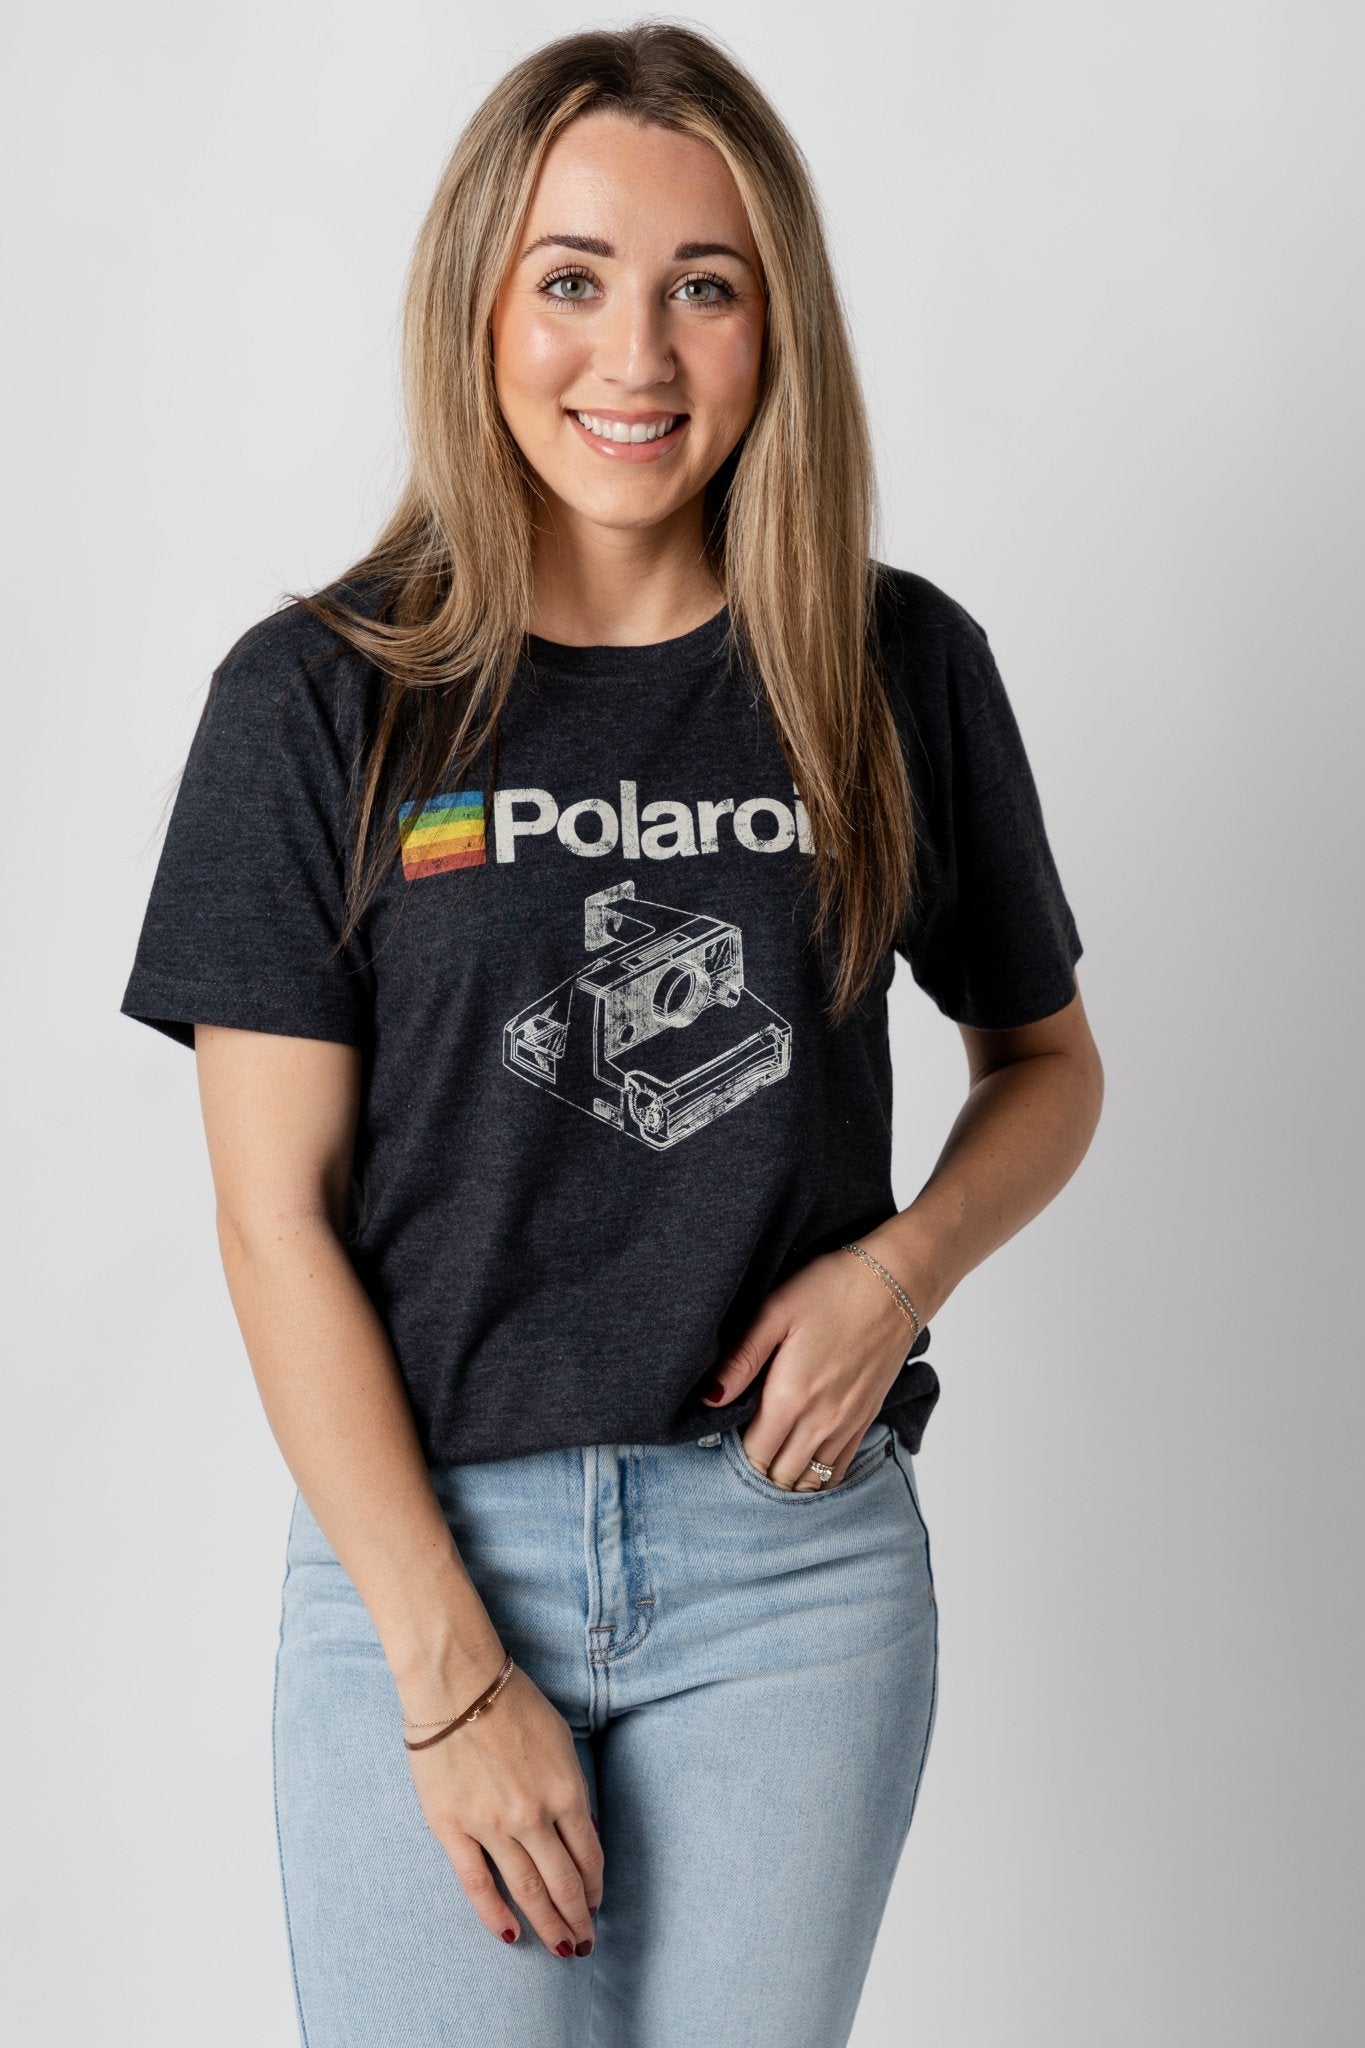 Polaroid red label t-shirt charcoal